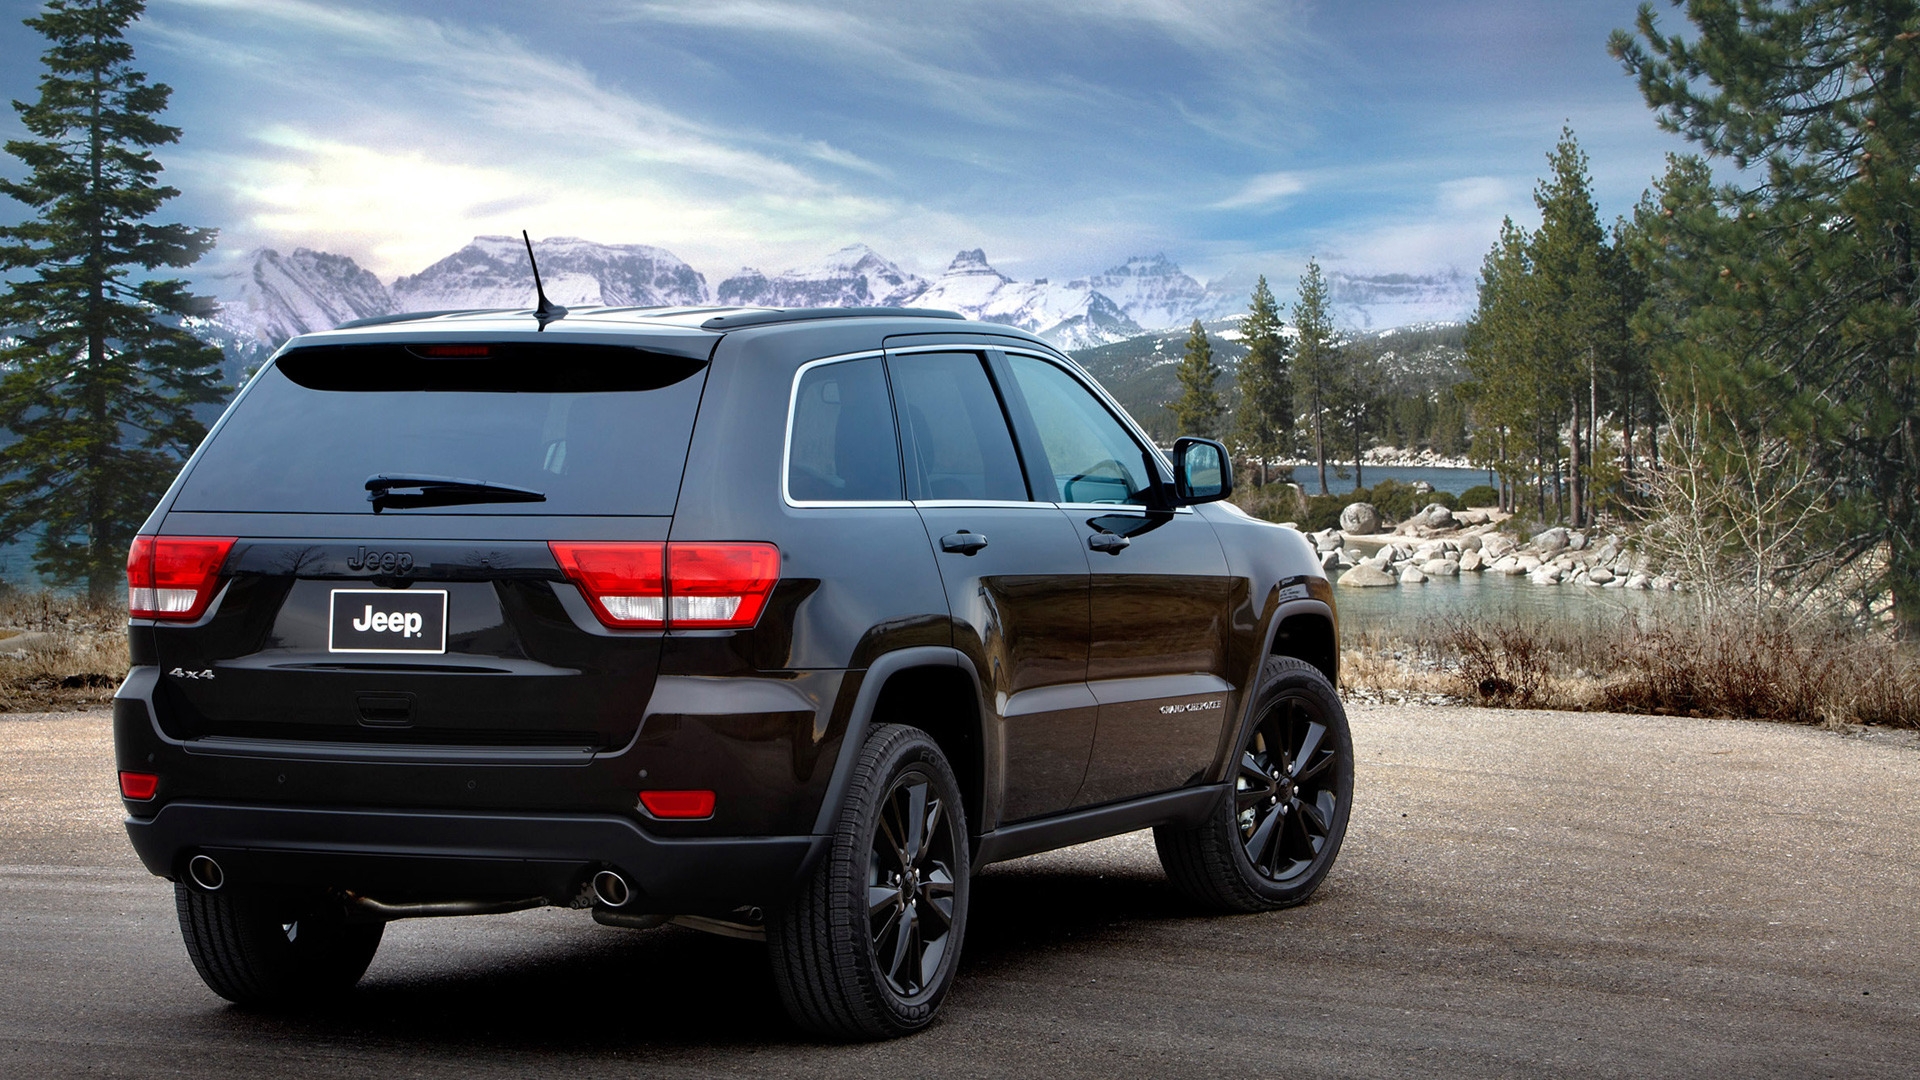 Jeep Grand Cherokee Concept for 1920 x 1080 HDTV 1080p resolution